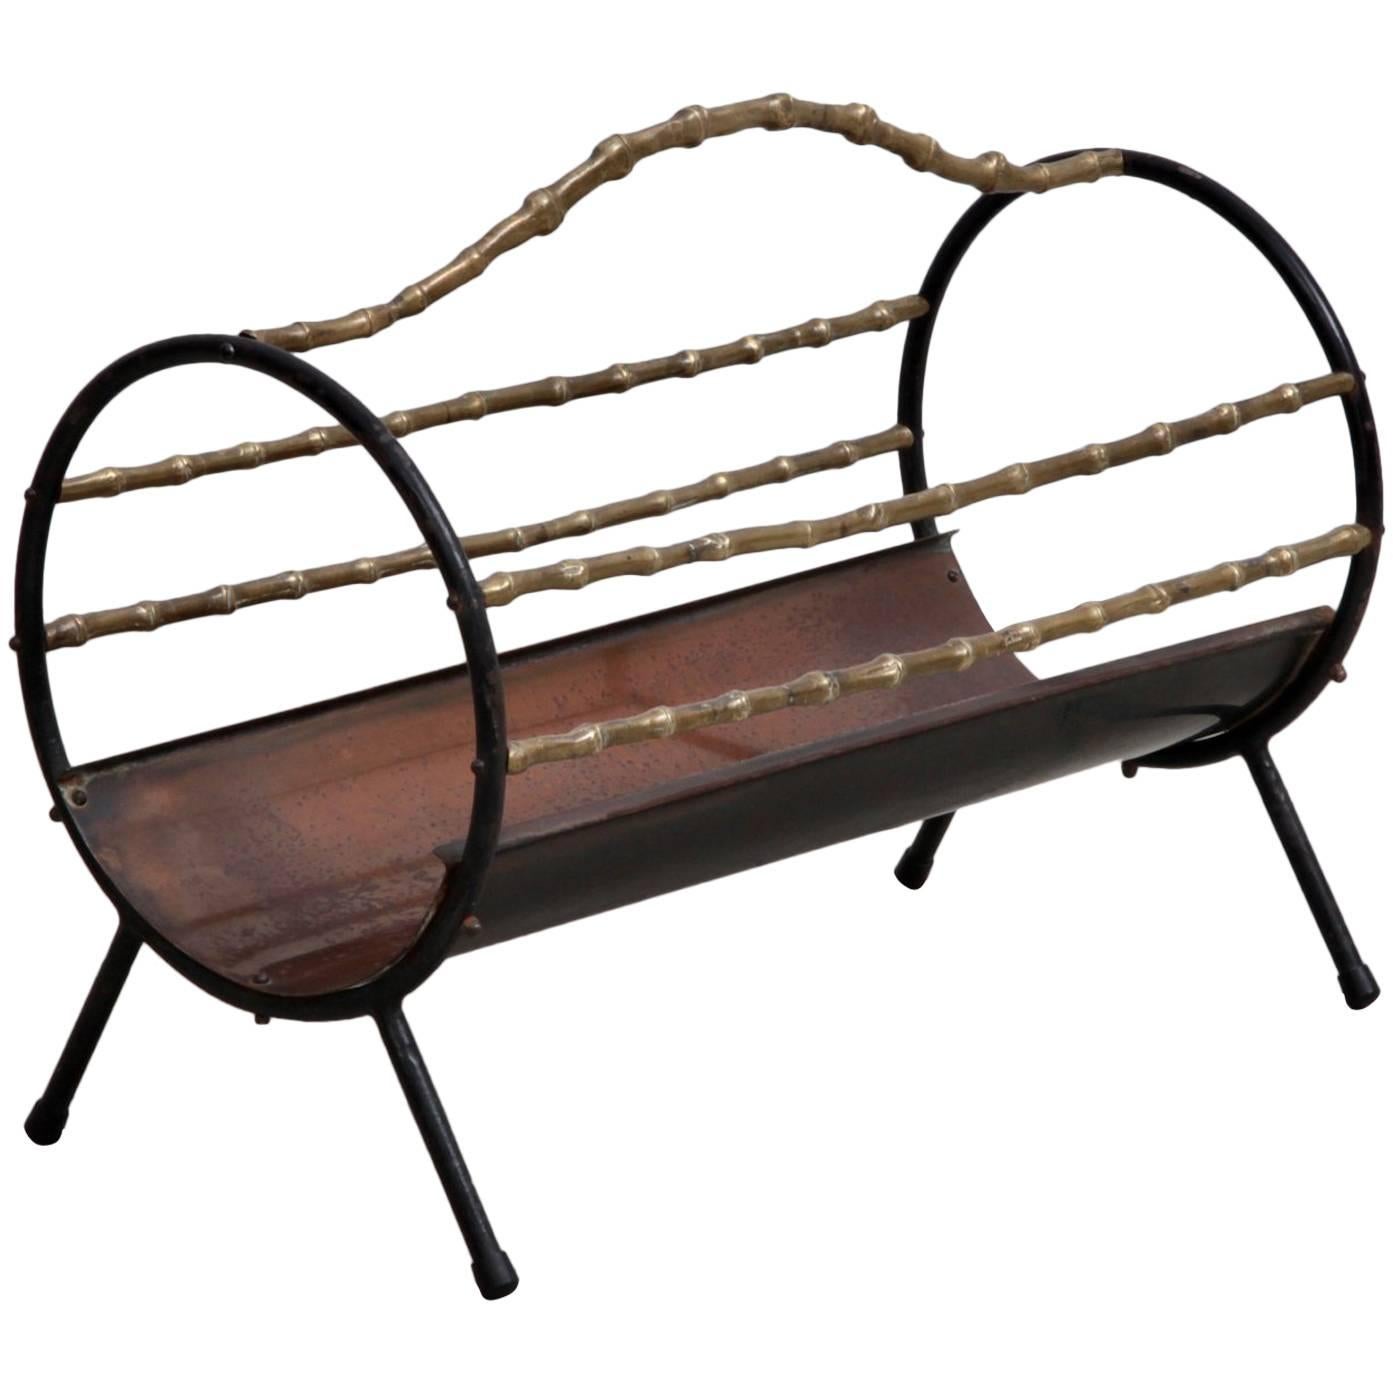 Bamboo Brass Fireplace Wood Holder in Copper and Wrought Iron